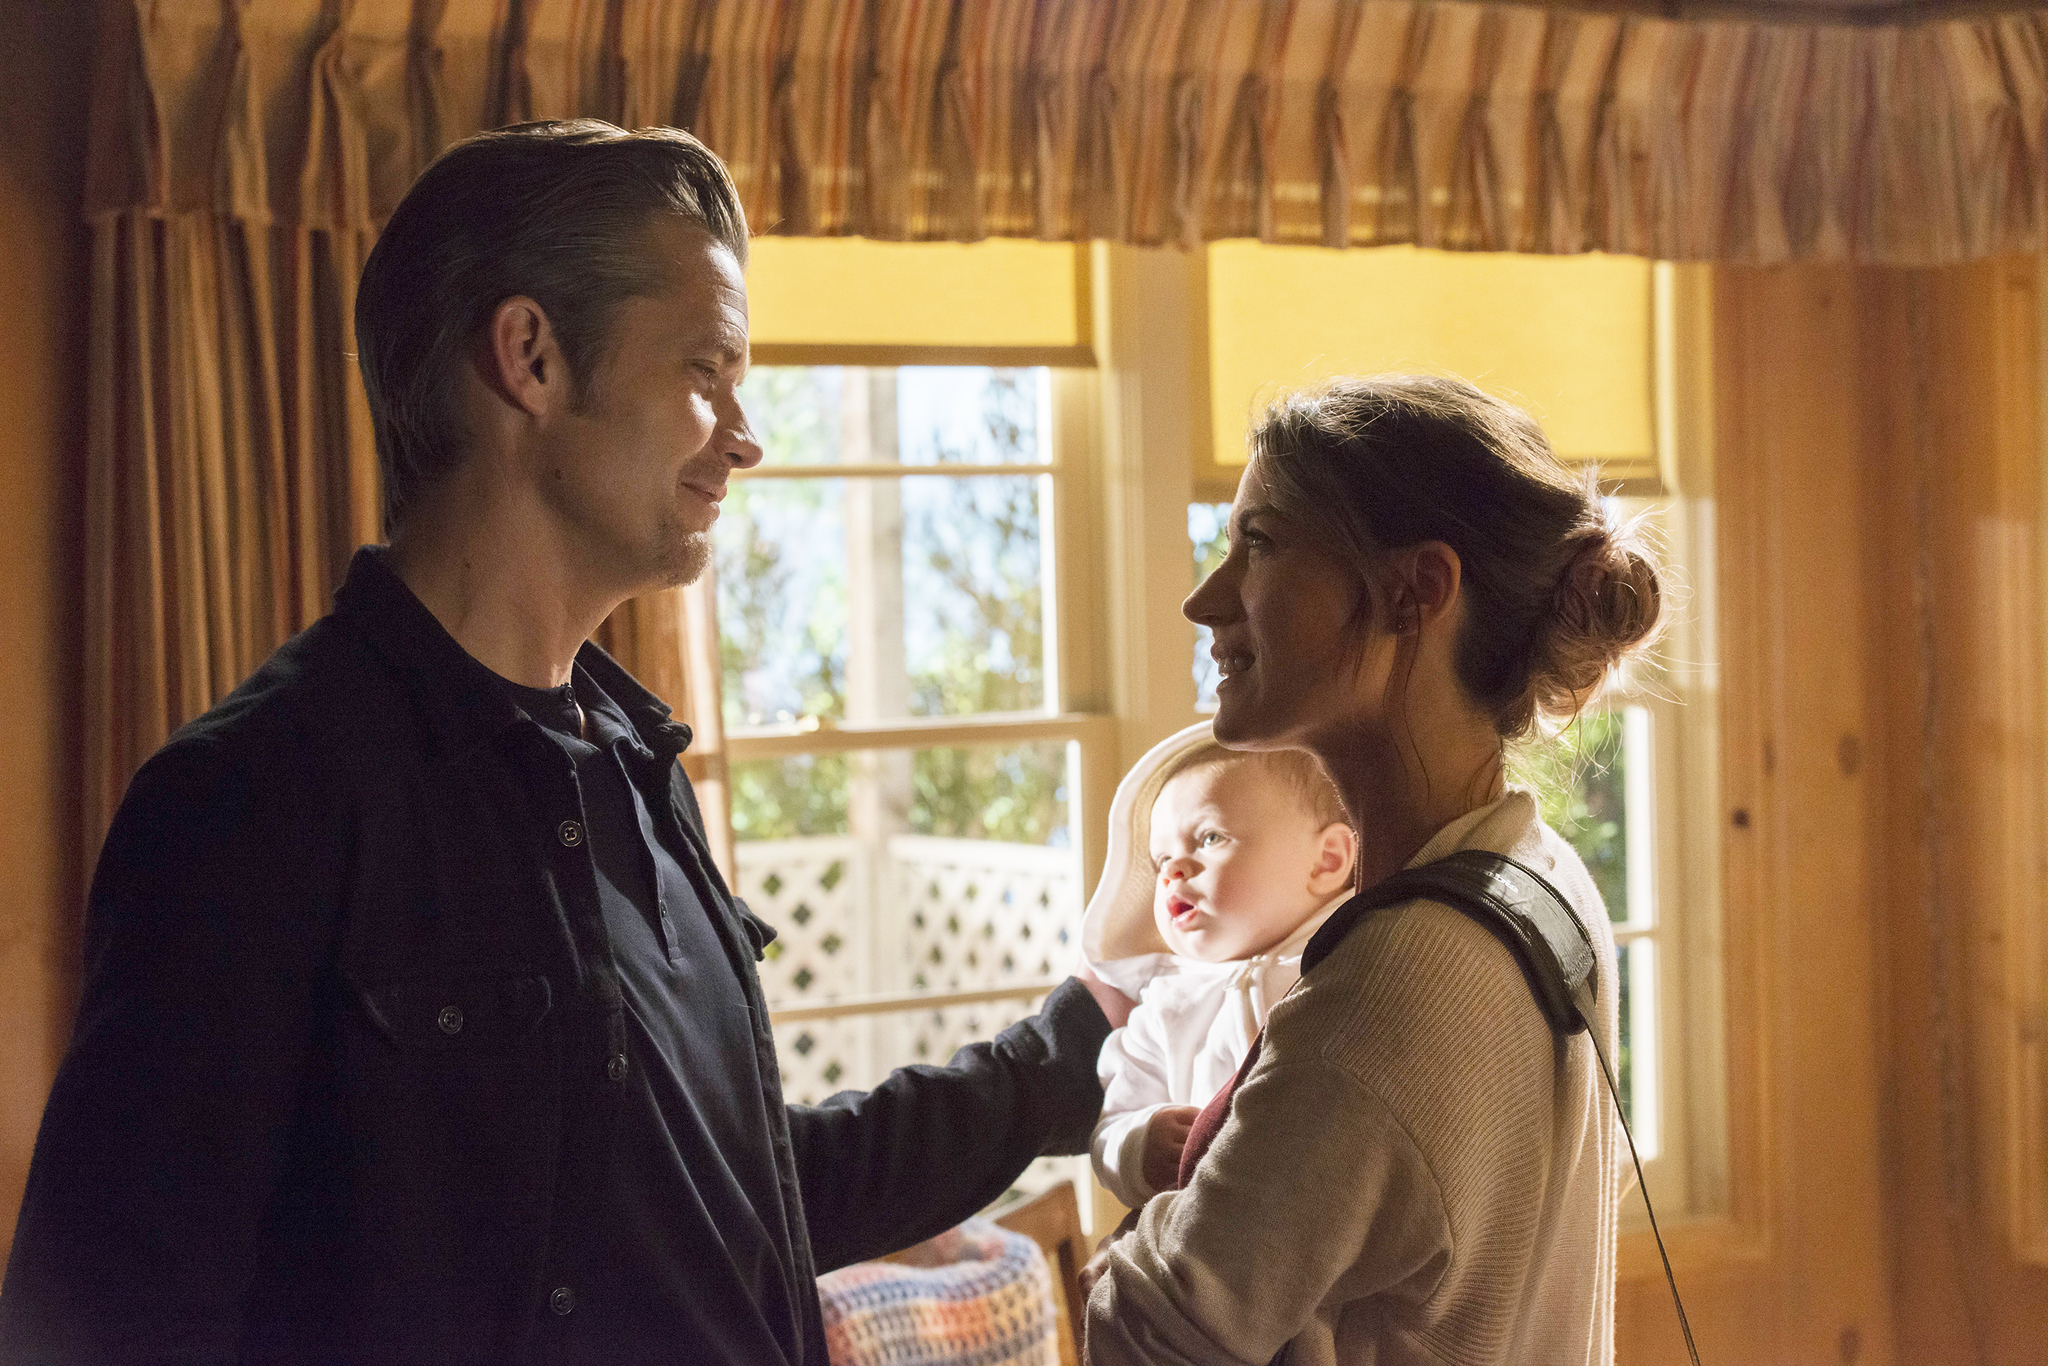 Still of Timothy Olyphant and Natalie Zea in Justified (2010)